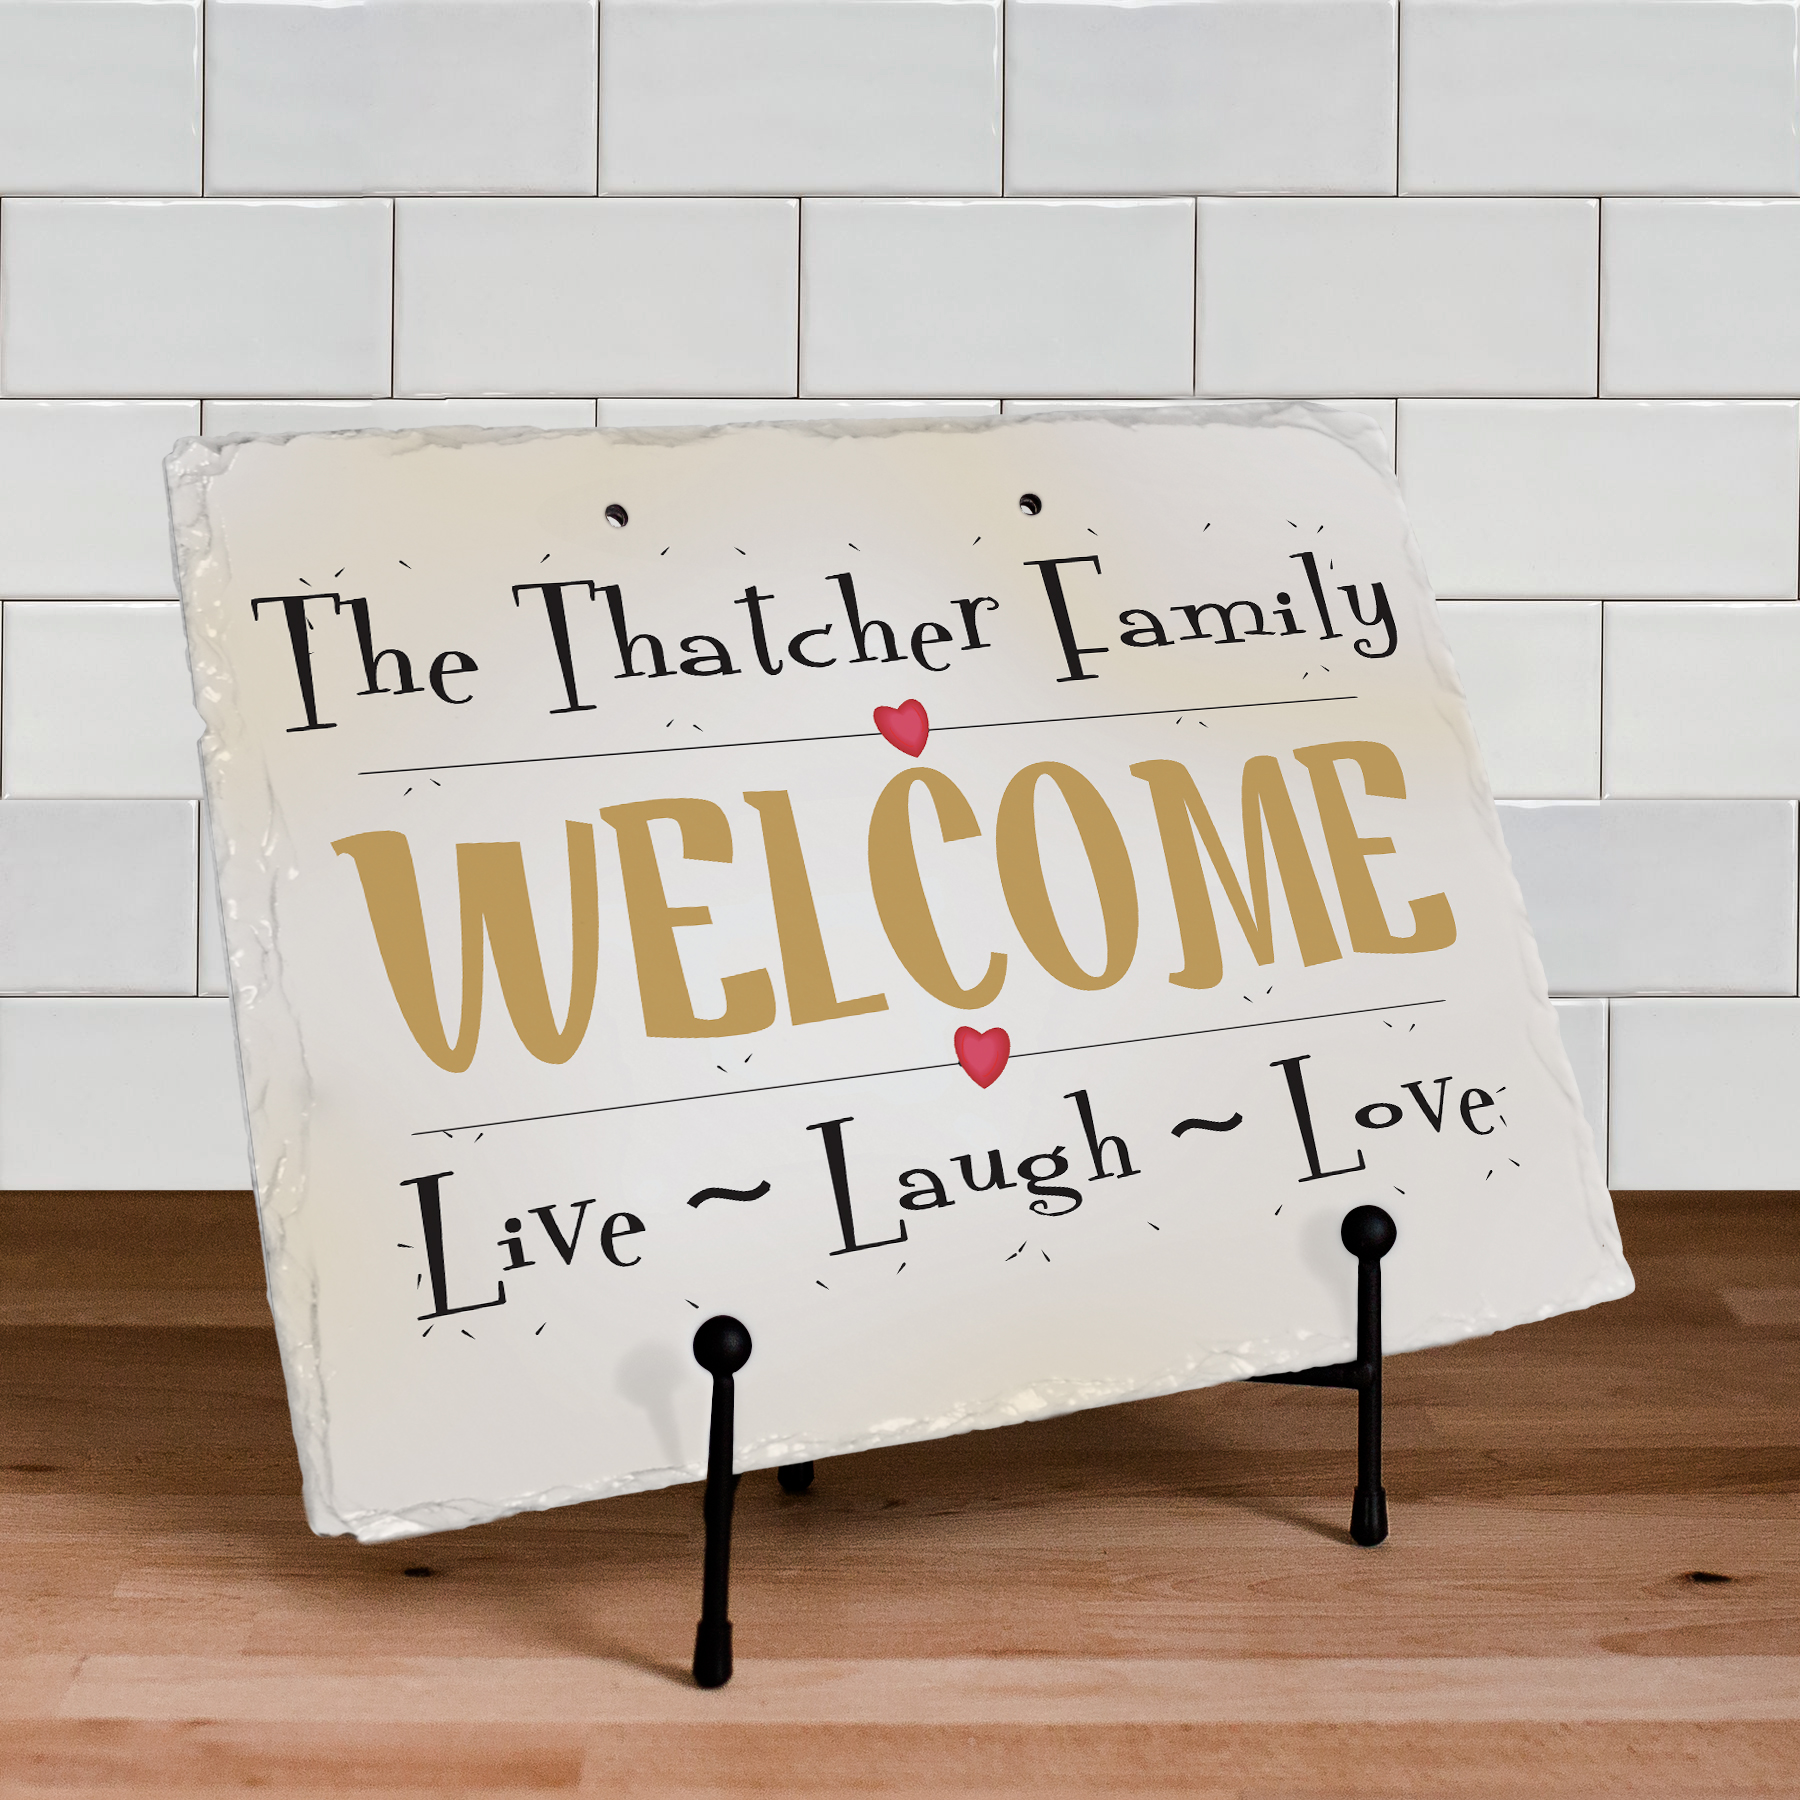 Live, Laugh, Love Personalized Slate Plaque | Personalized Welcome Signs